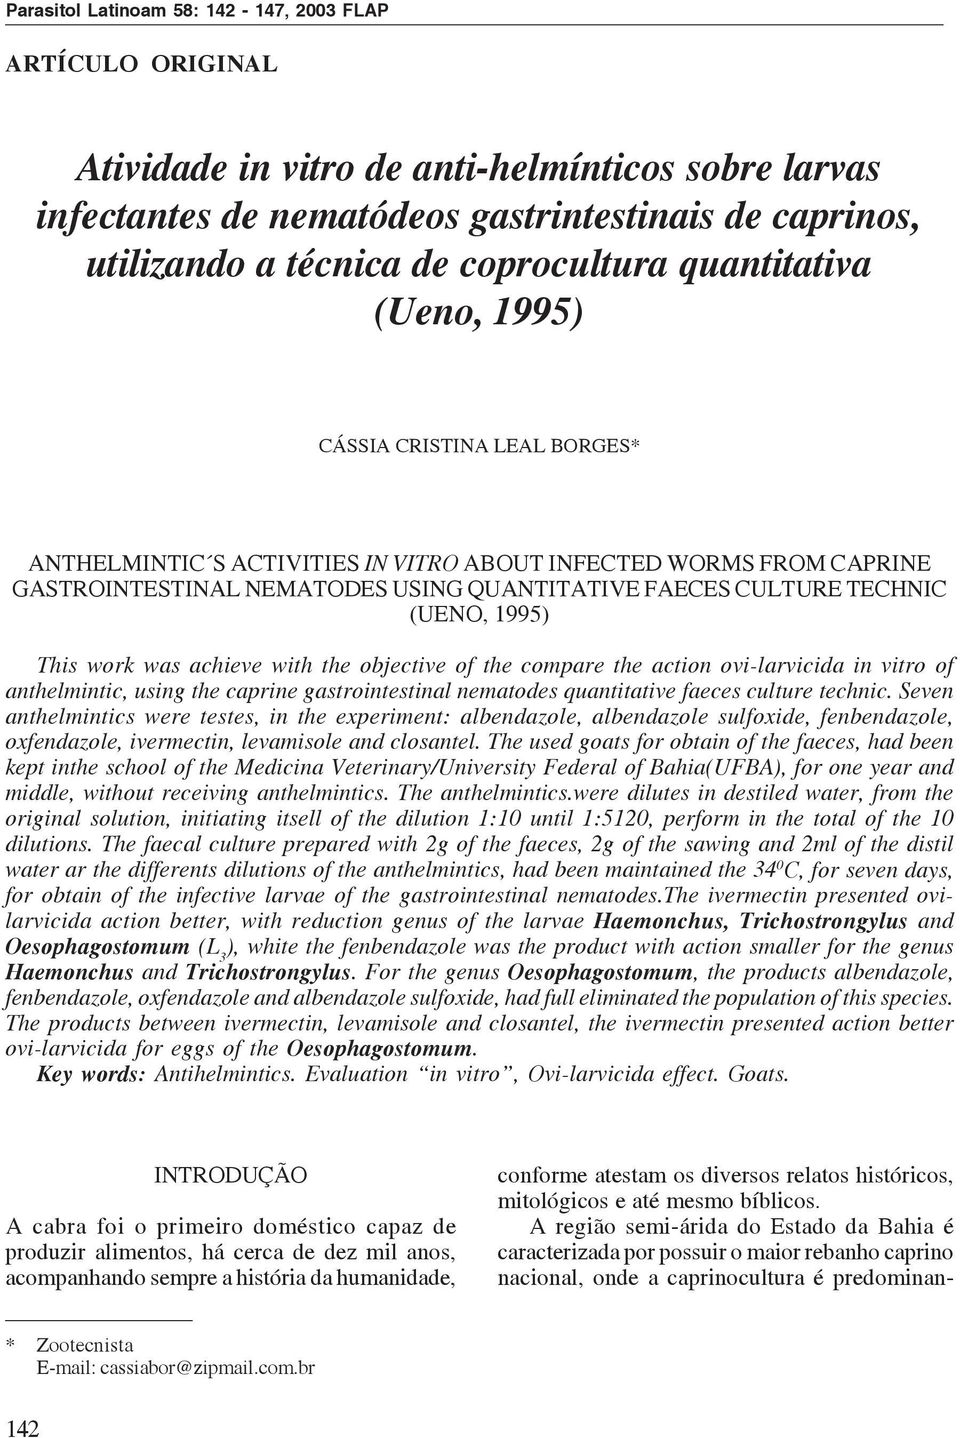 TECHNIC (UENO, 1995) This work was achieve with the objective of the compare the action ovi-larvicida in vitro of anthelmintic, using the caprine gastrointestinal nematodes quantitative faeces